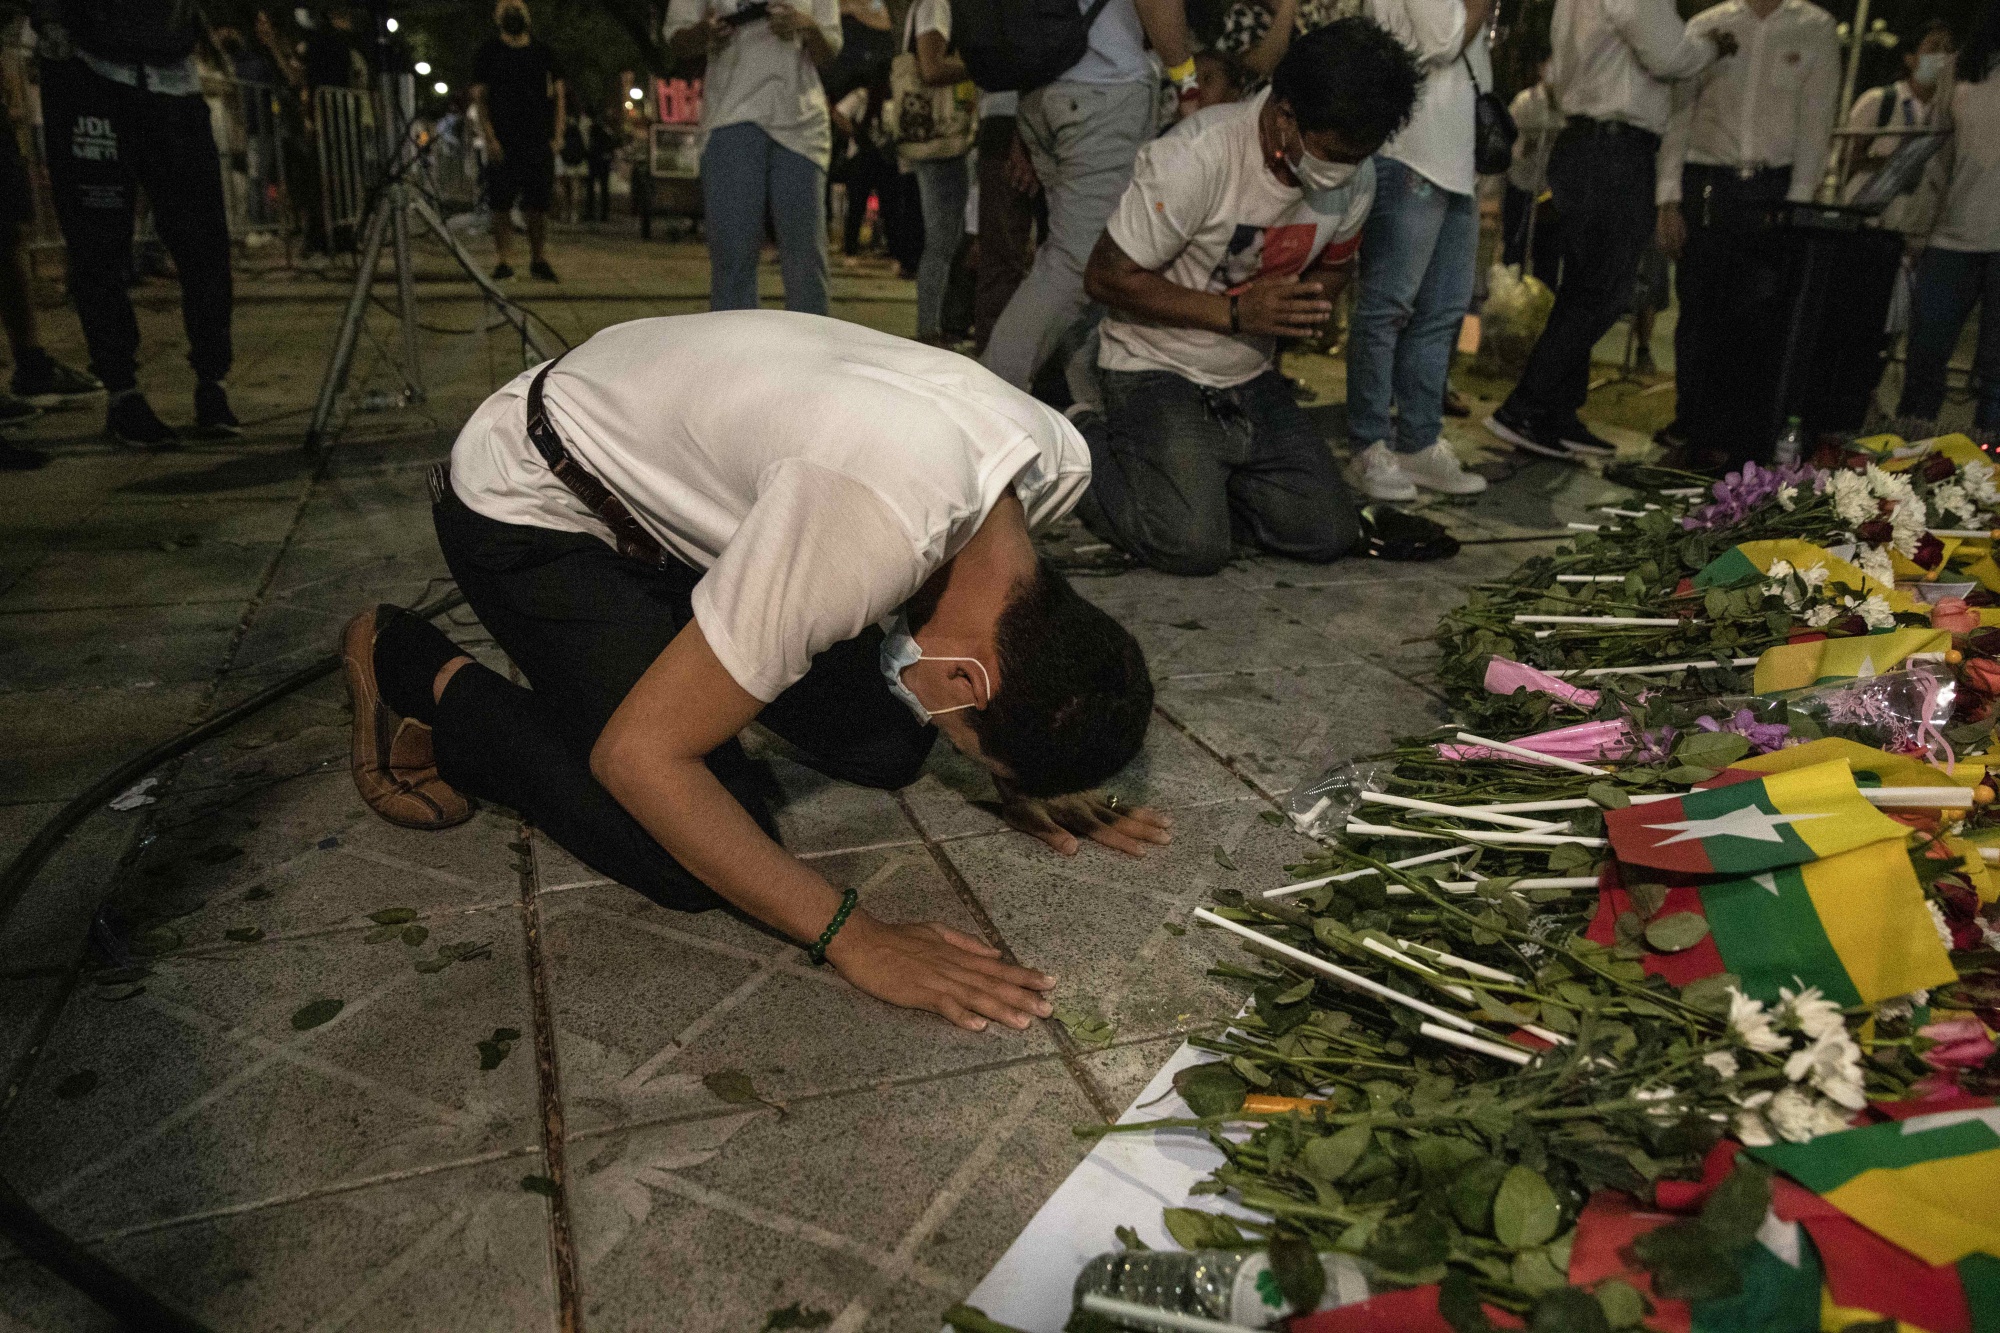 Demonstrators lay flags and flowers during a protest outside the United Nations Building in Bangkok, Thailand, in&nbsp;March 2021. The UN says more than 1,500 civilians including&nbsp;young children have been killed by the military junta that seized power last year.